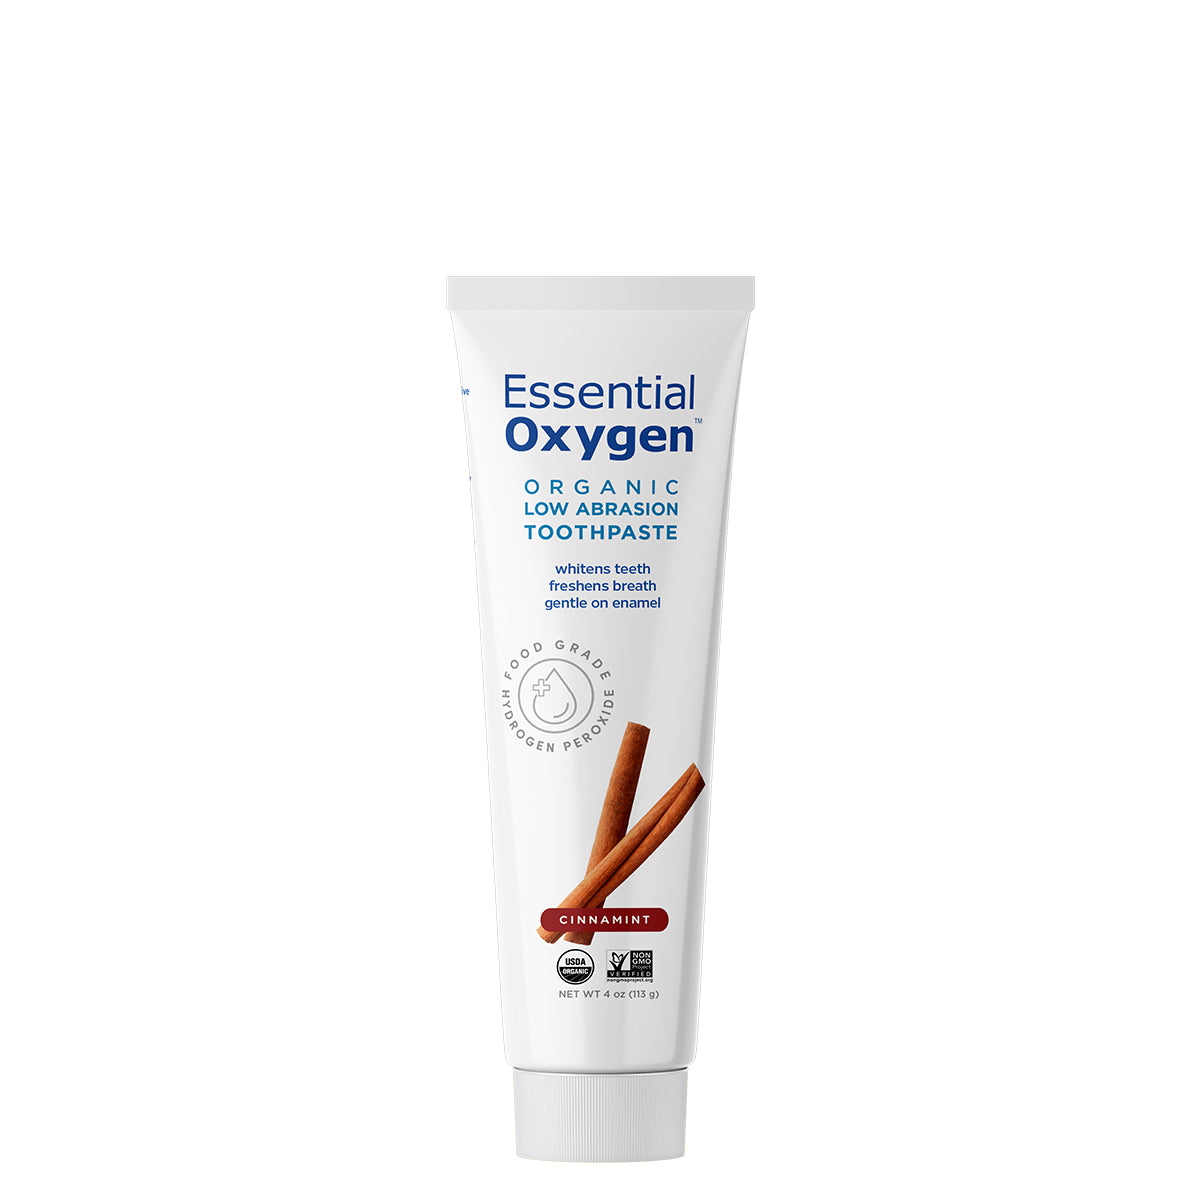 Organic Low Abrasion Toothpaste | Cinnamint